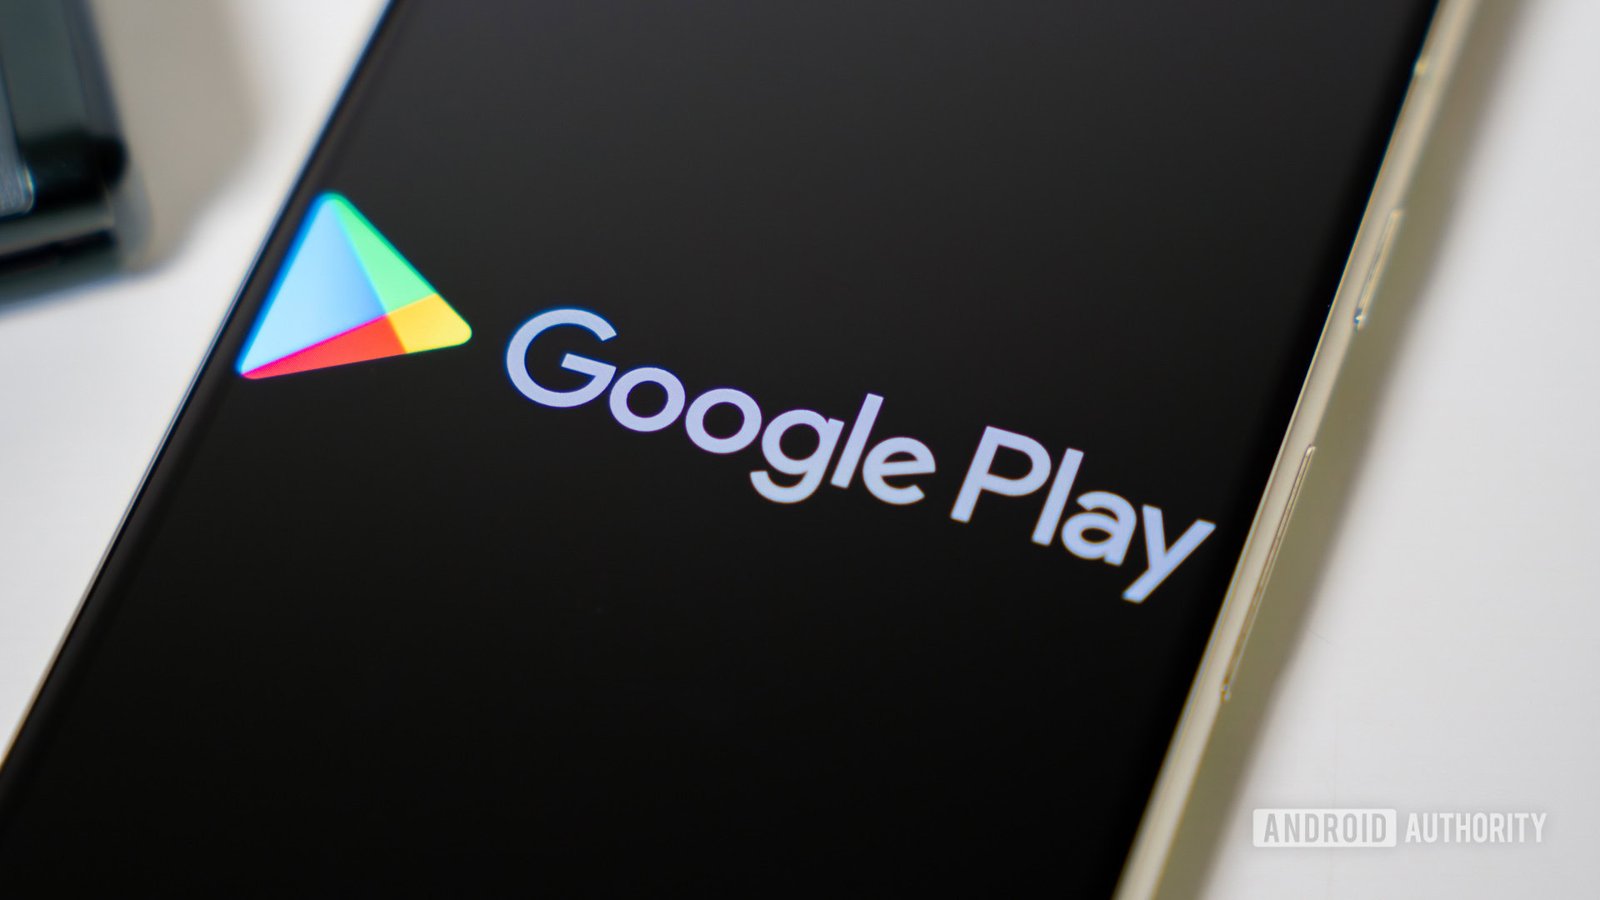 Google Play Store will soon open installed apps automatically (APK teardown)